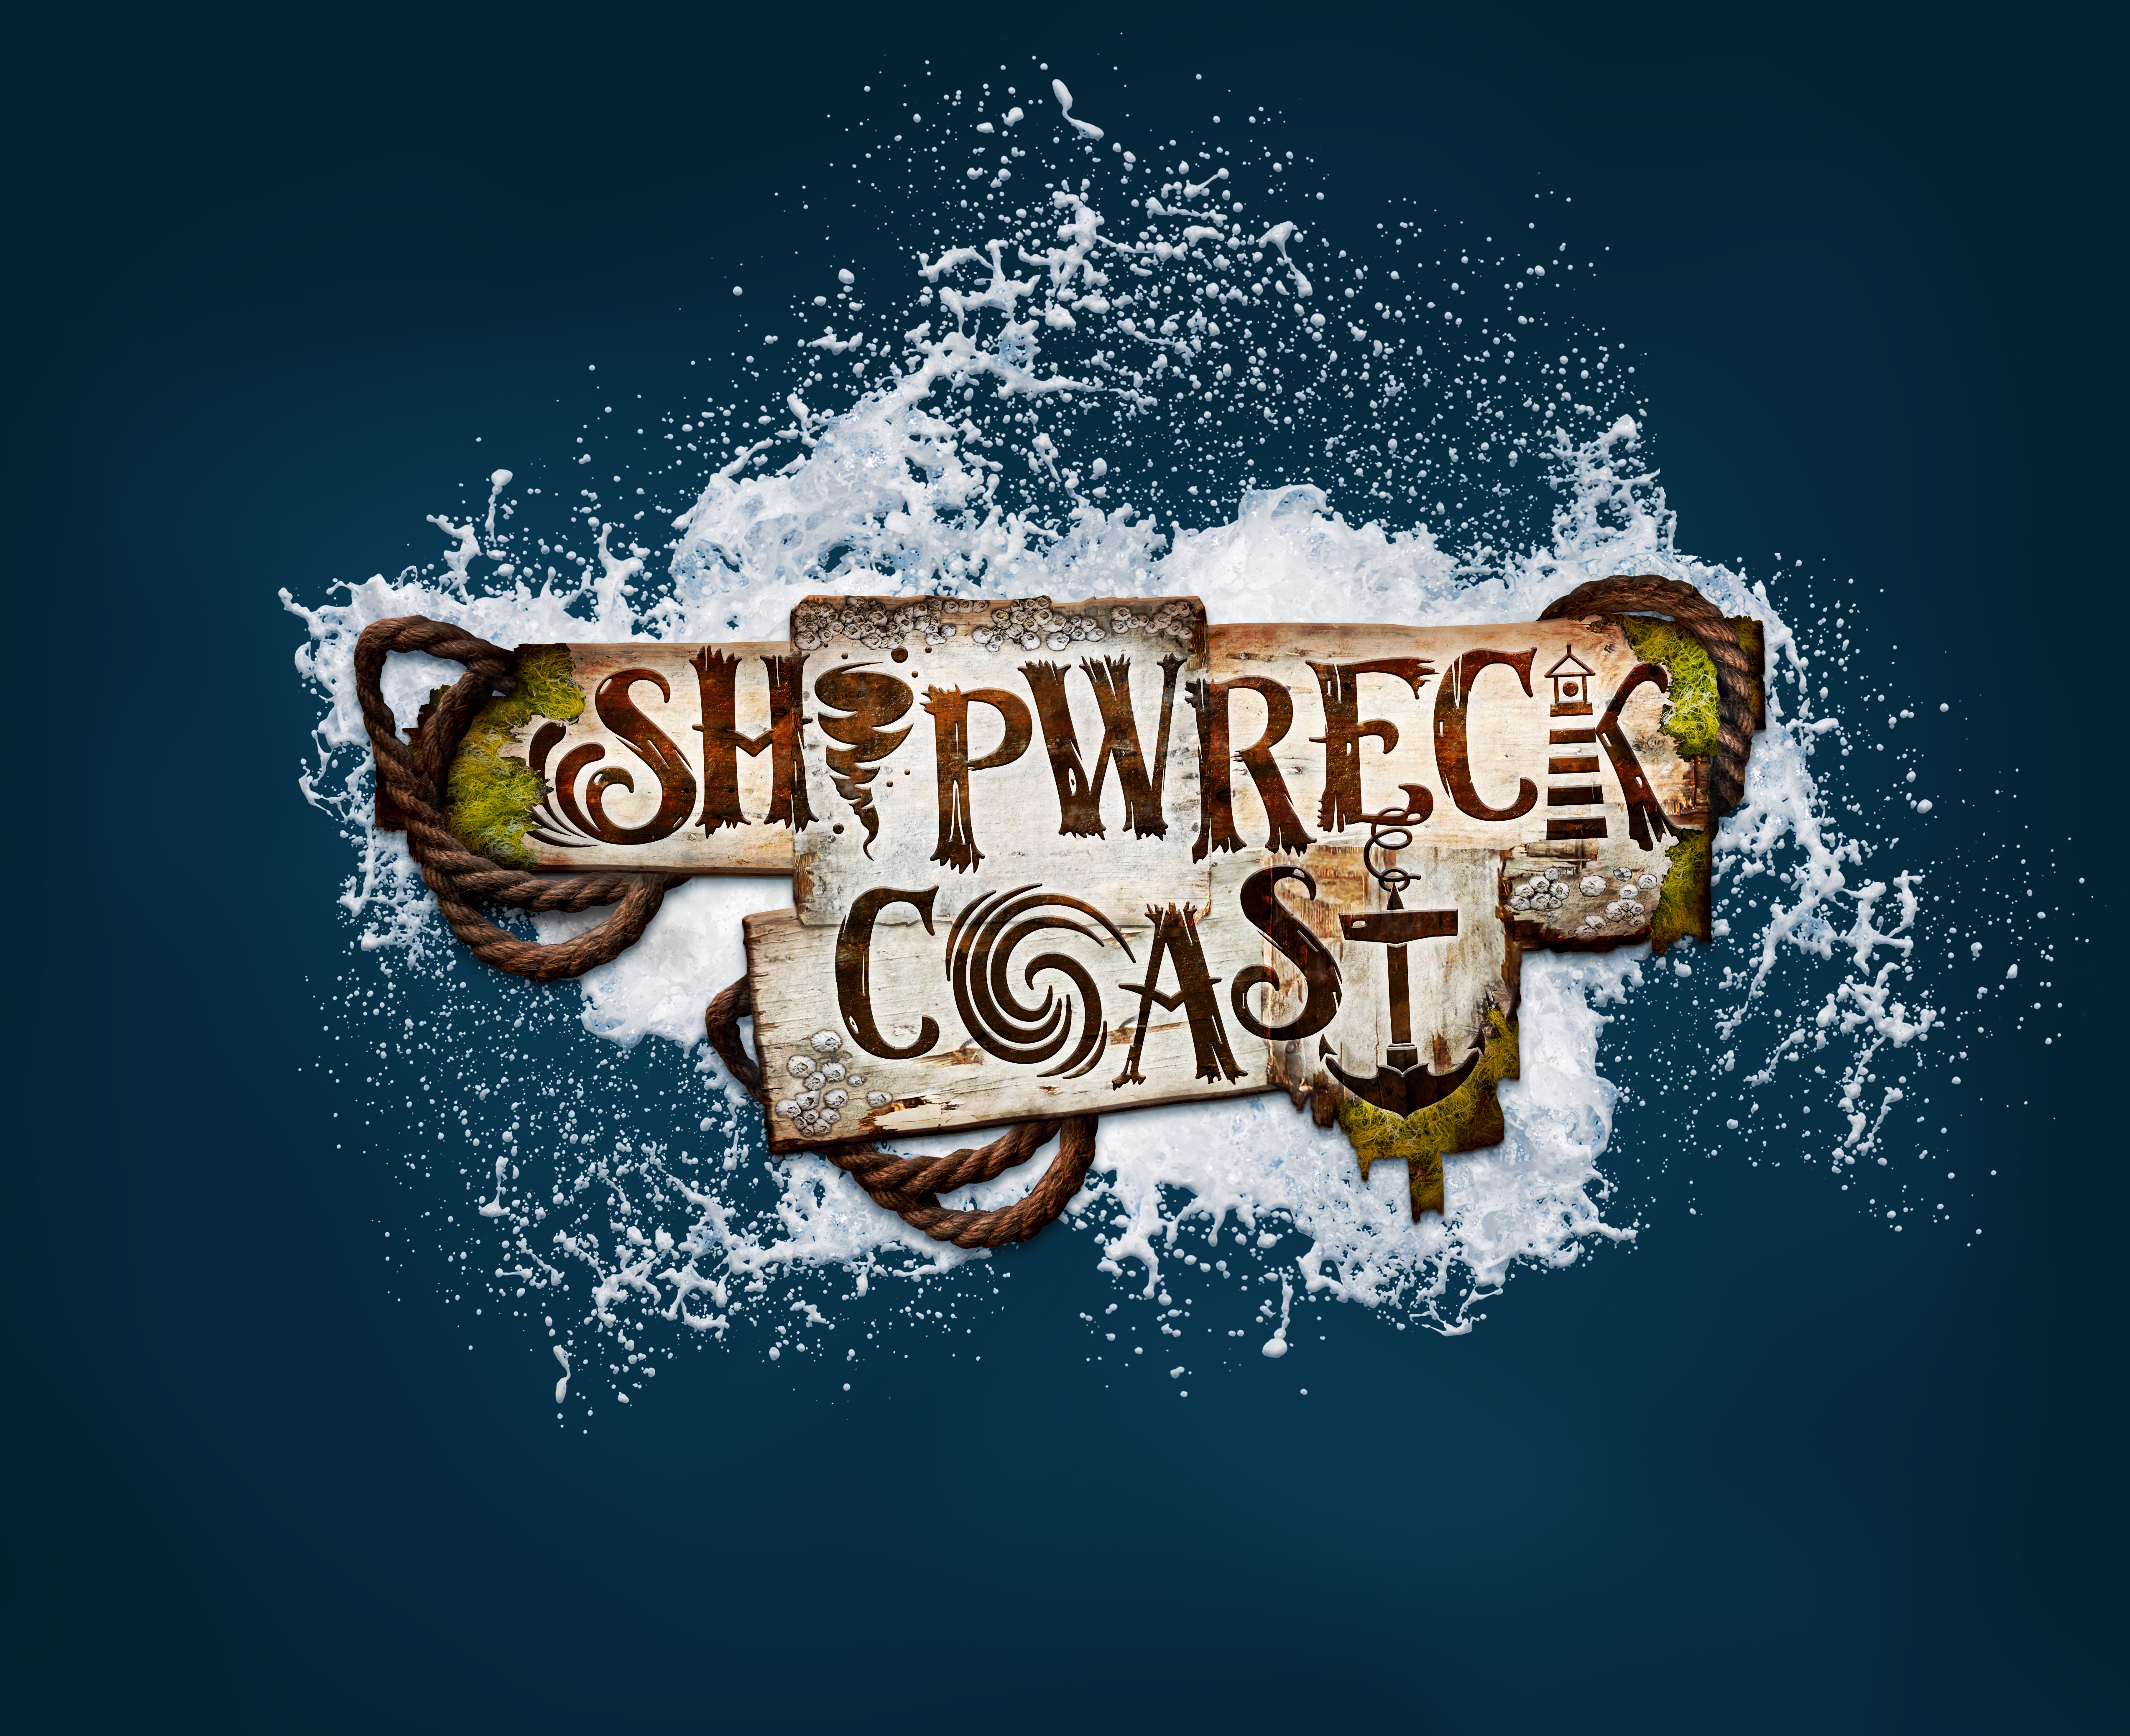 New for 2022 Shipwreck Coast Opens July 15th